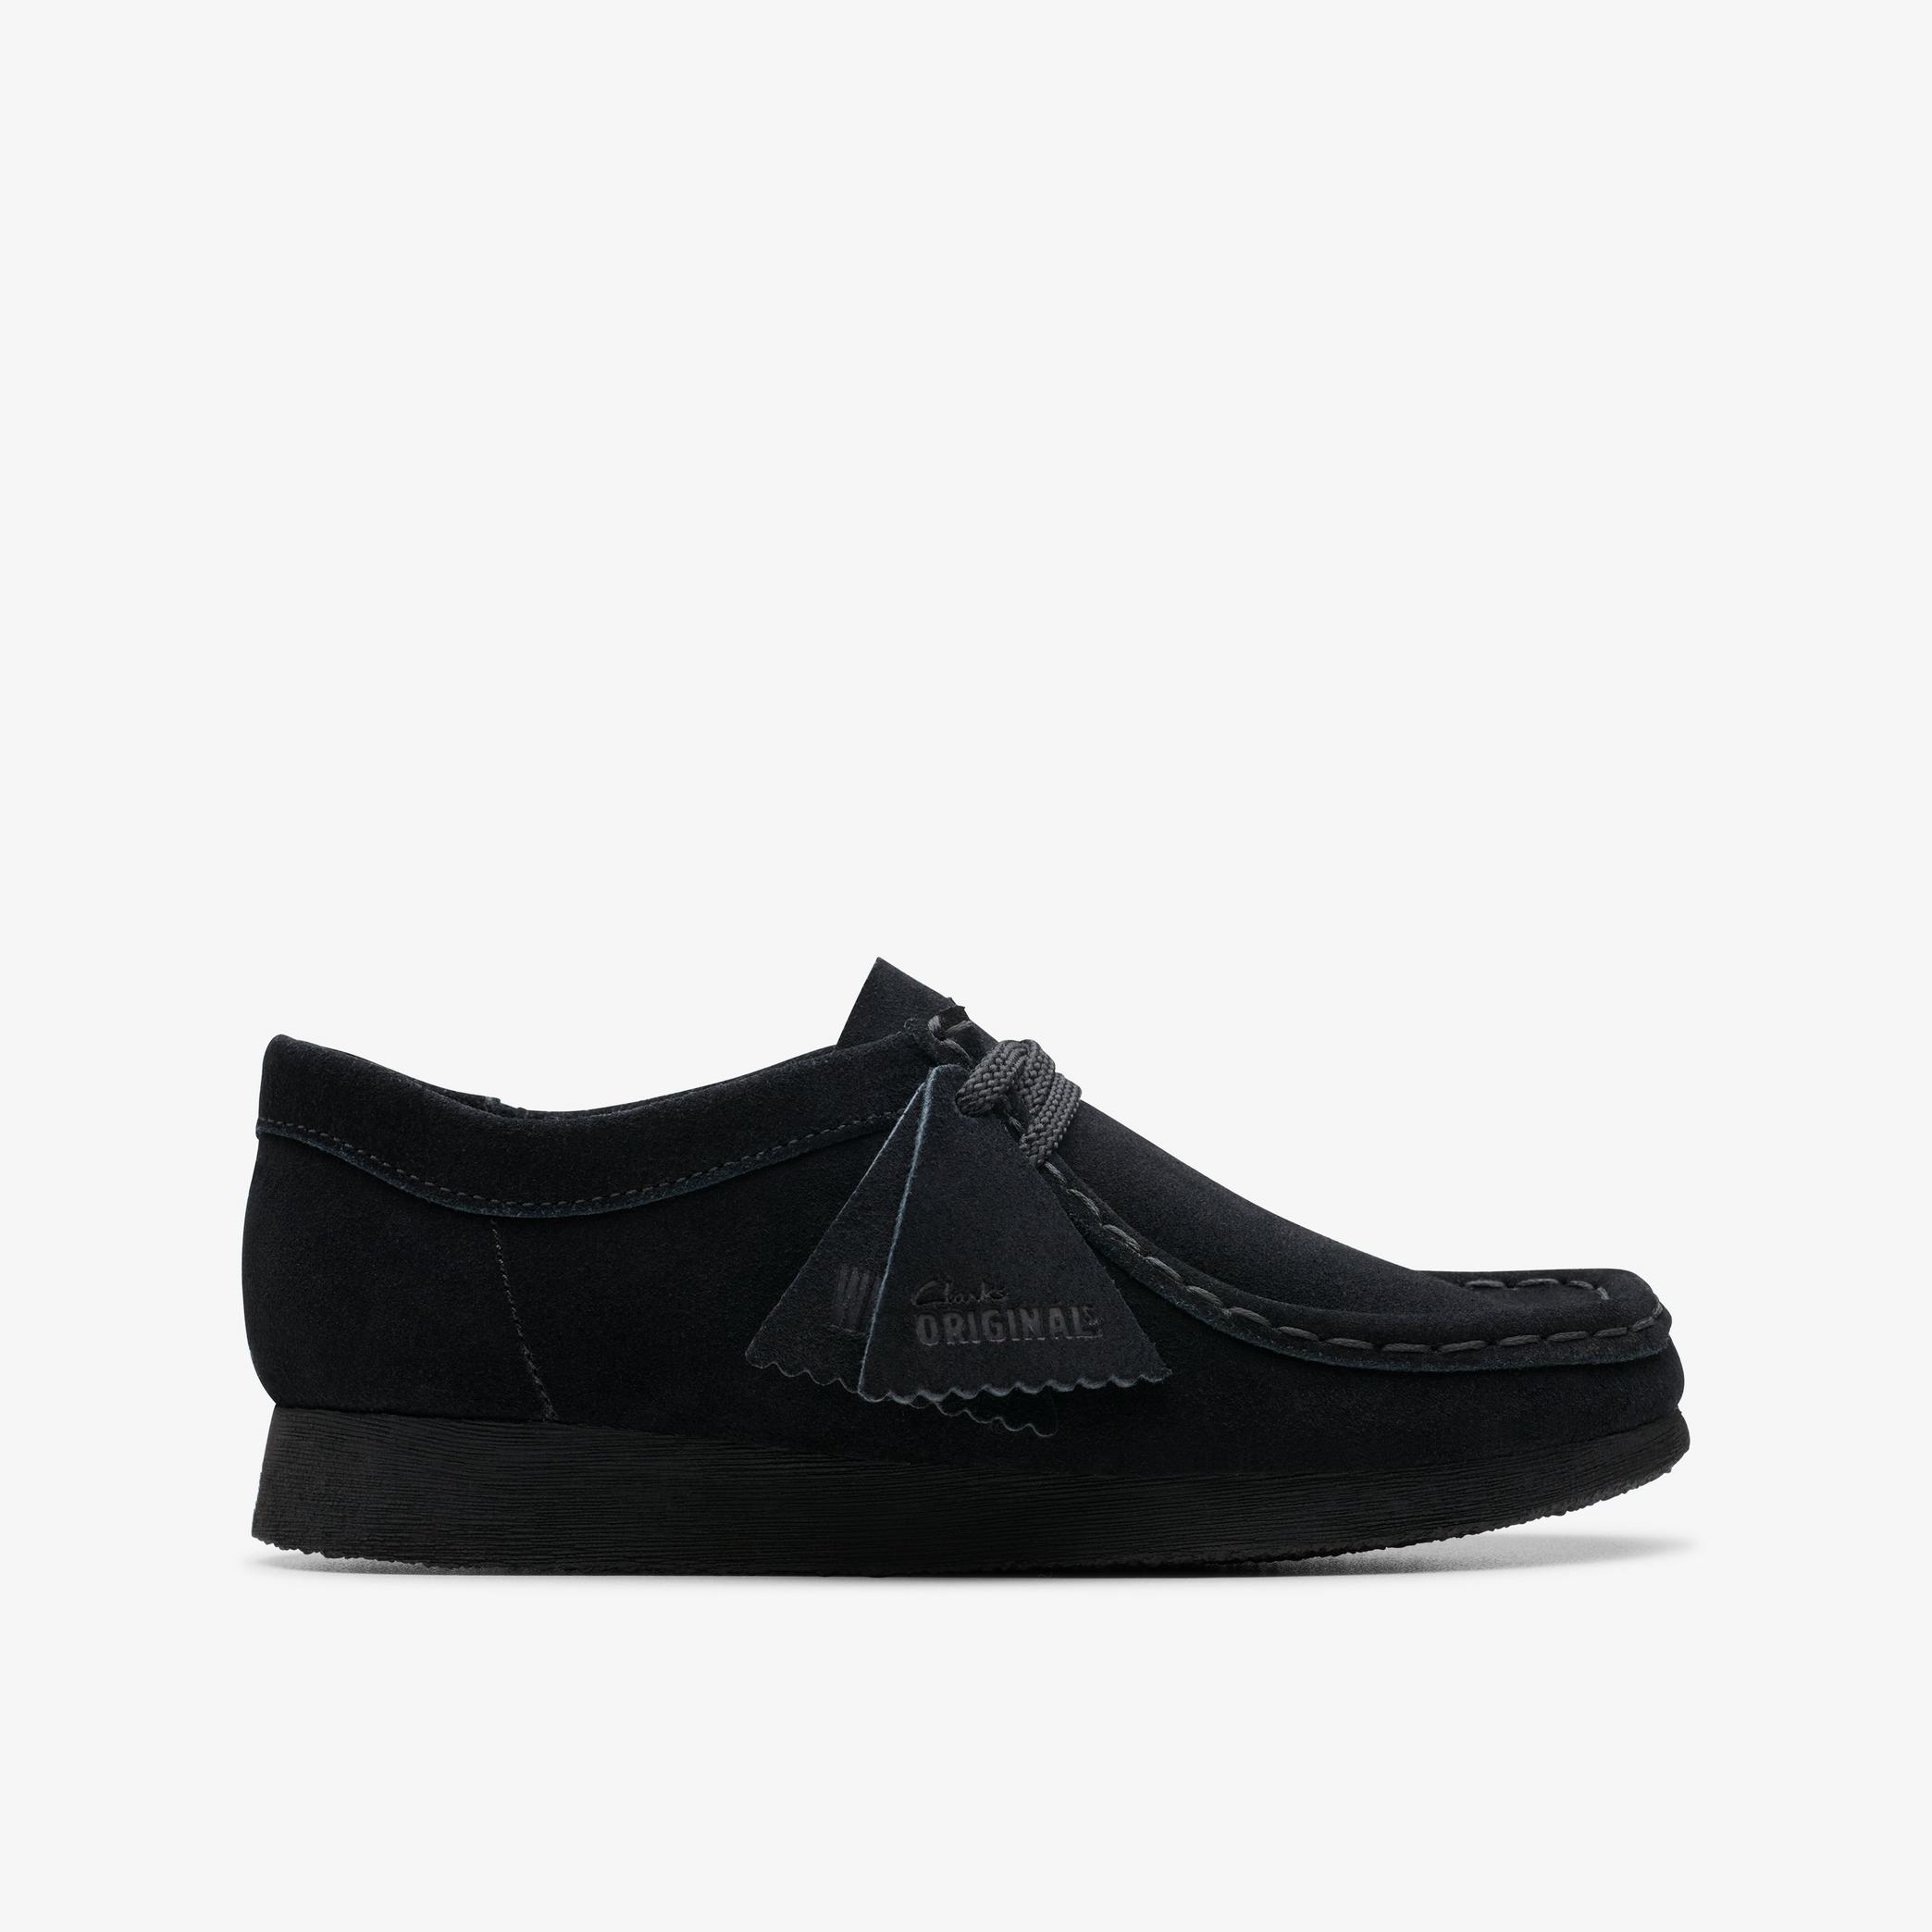 Wallabee Older Black Suede Shoes, view 1 of 6